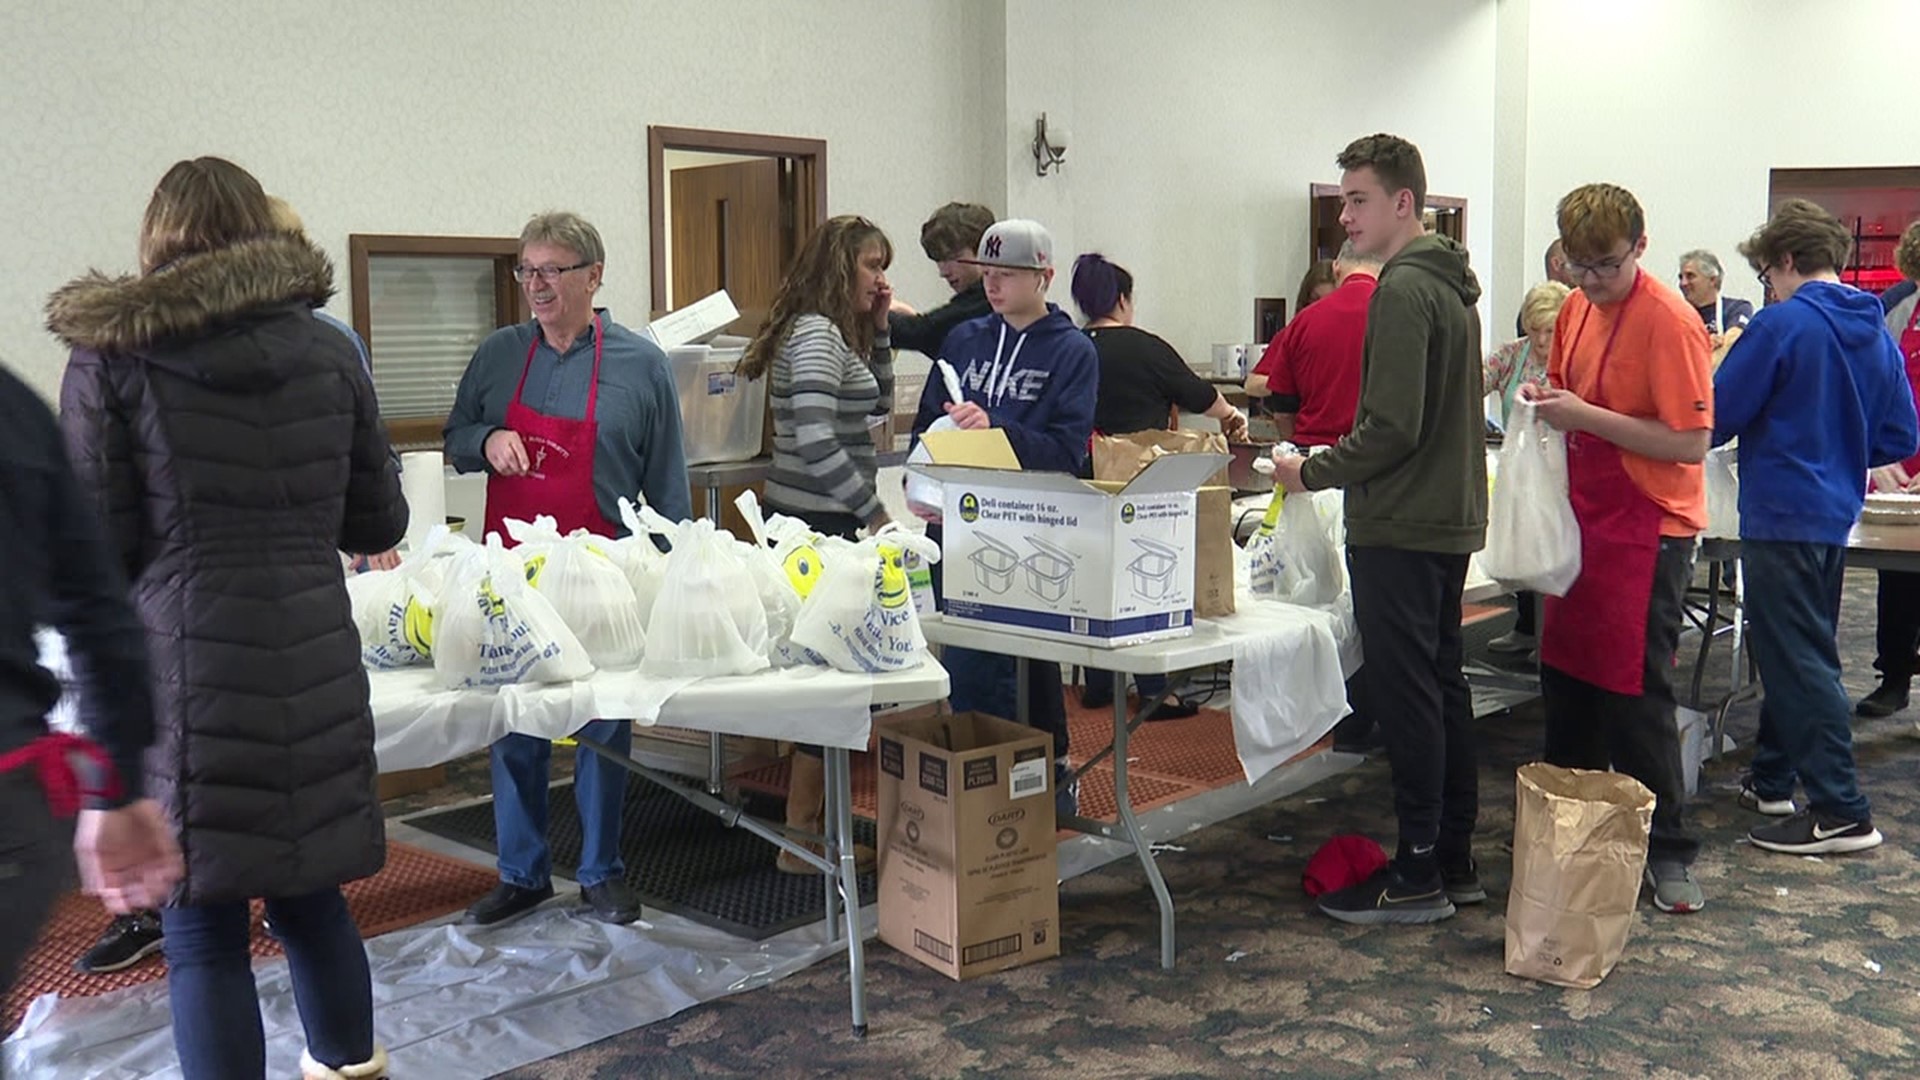 A church in Luzerne County held its semi-annual pasta dinner Sunday.